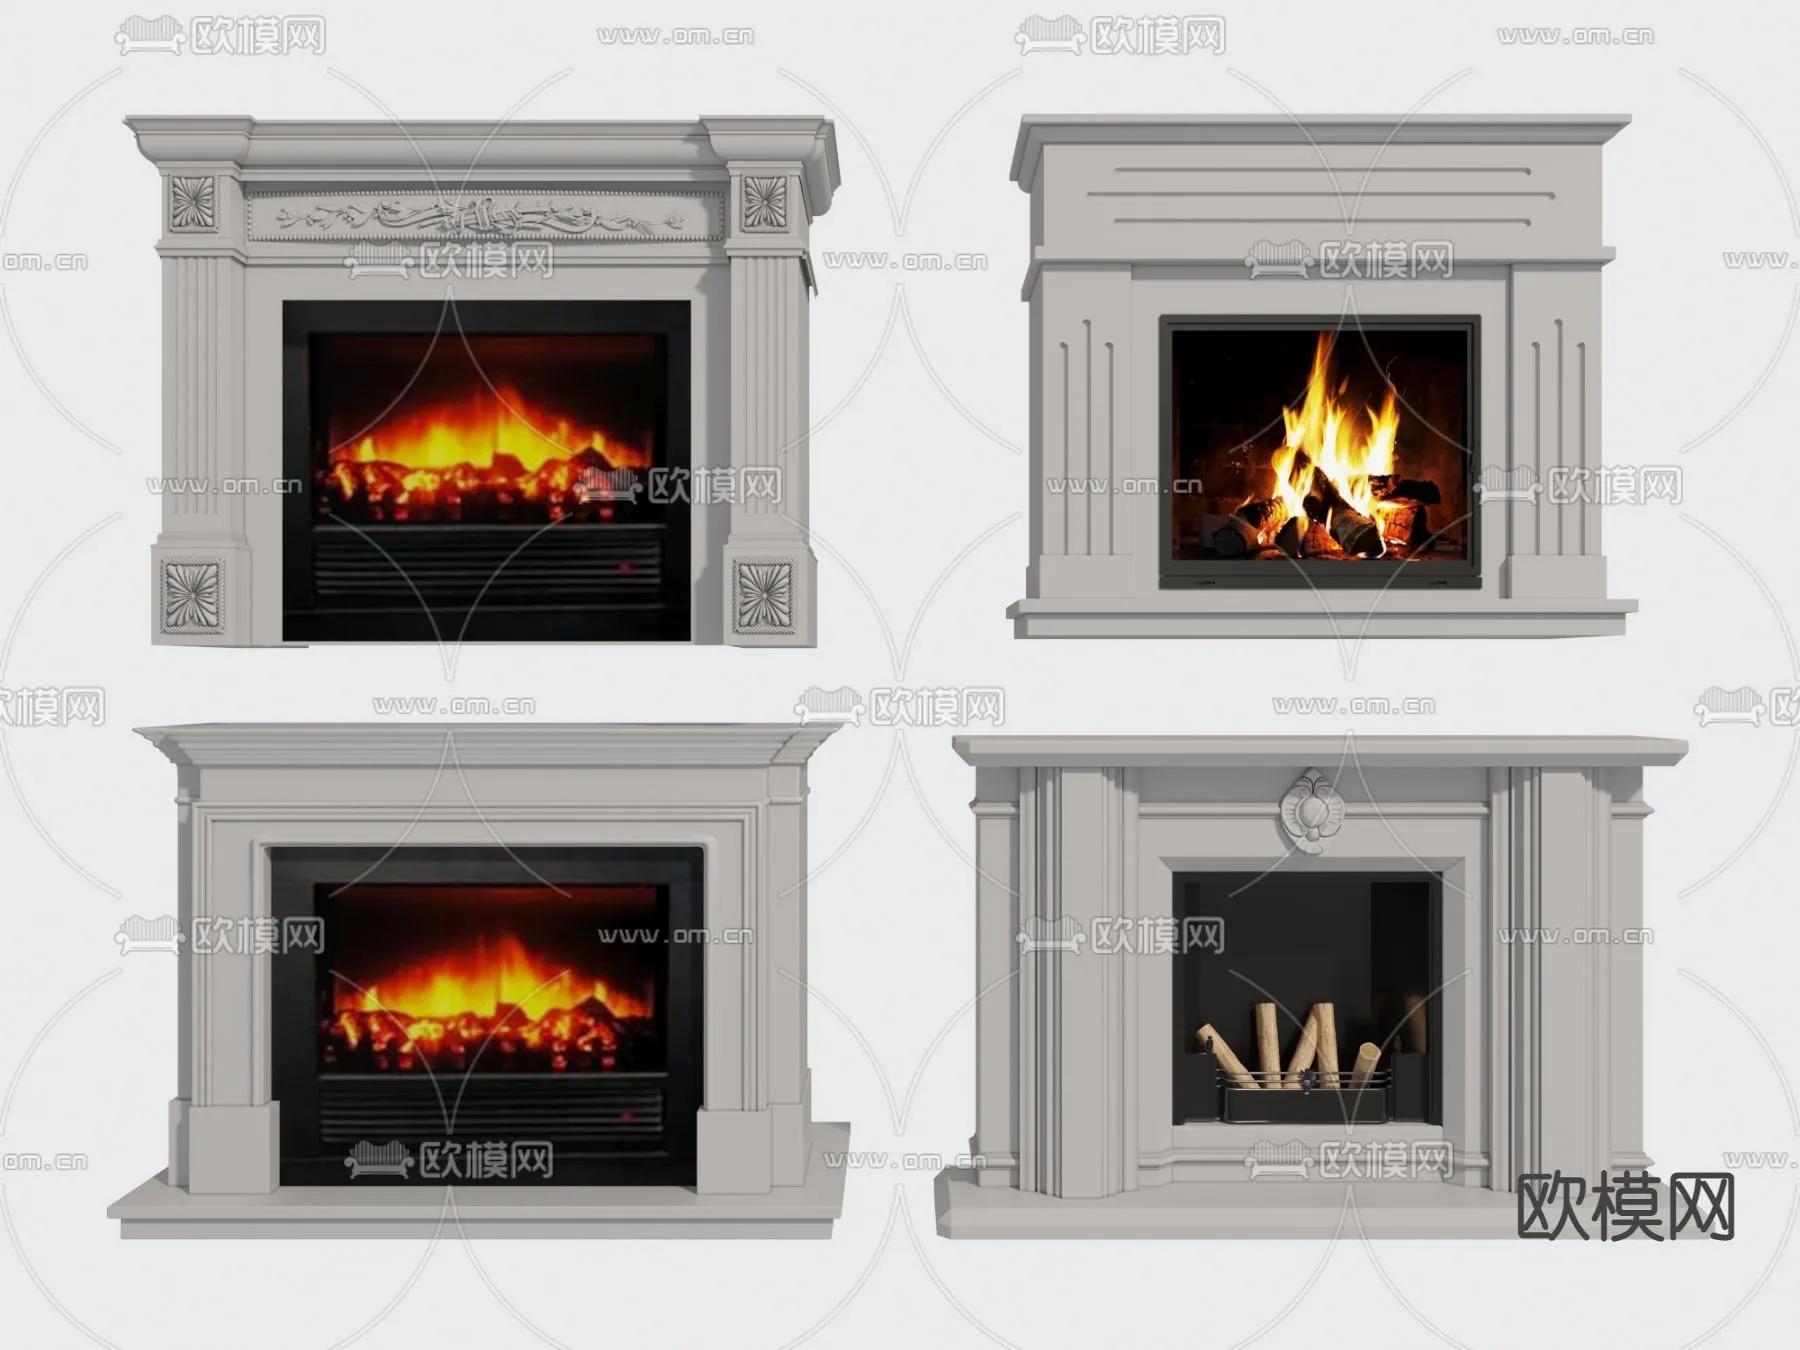 CLASSIC – FIREPLACE 3DMODELS – 081